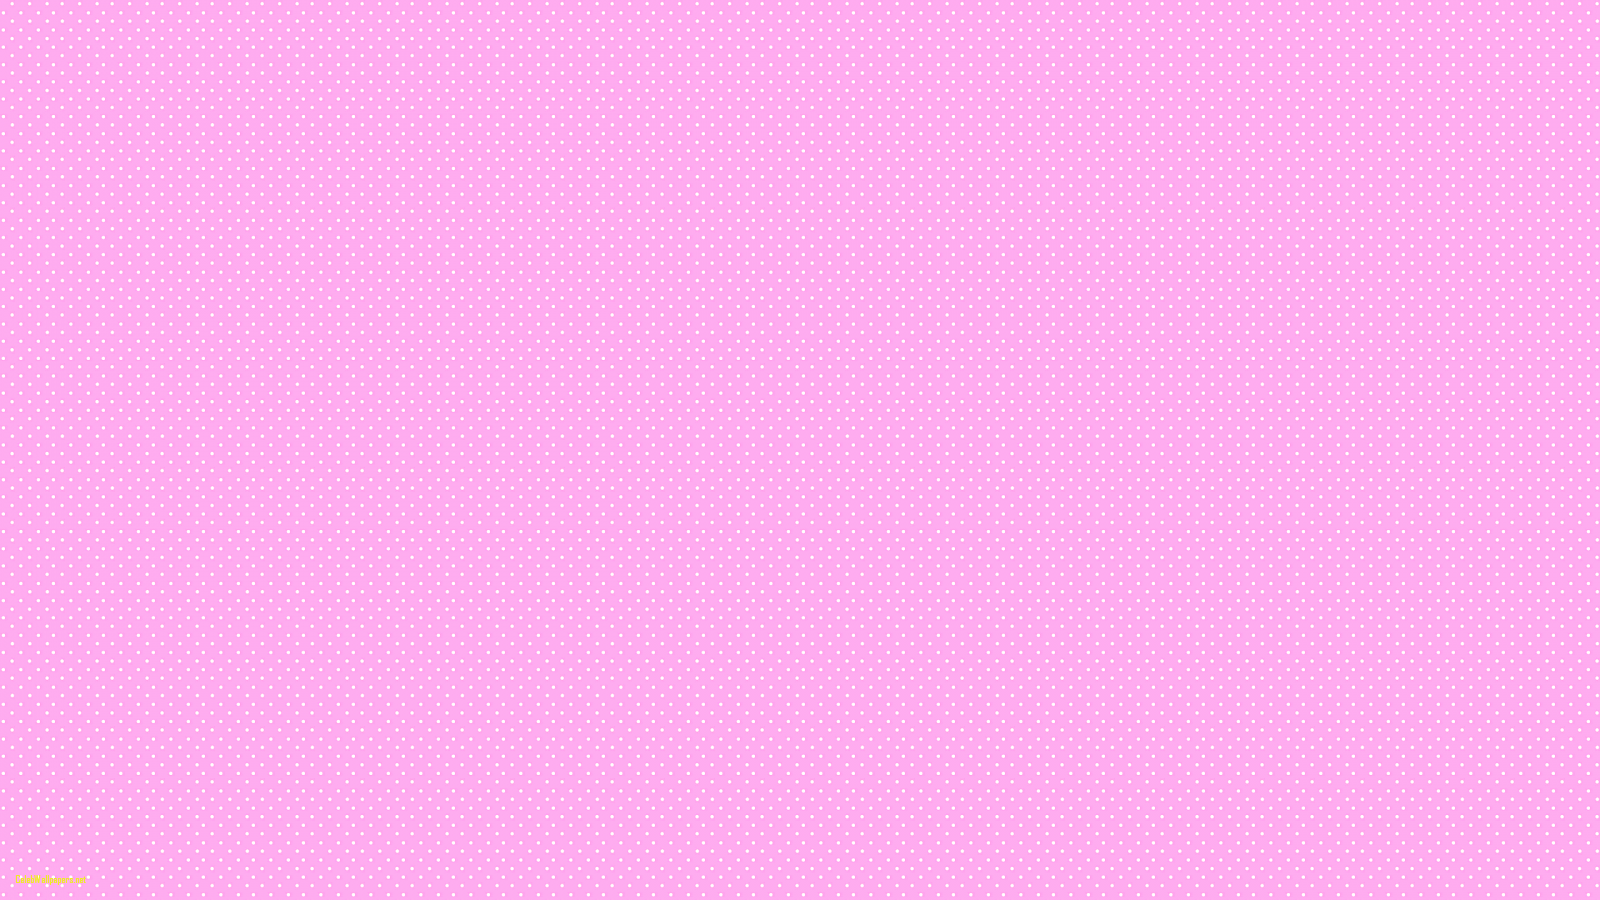 Floral Pink Blank Wallpaper Stock Photo - Image of decor, pink: 38174560